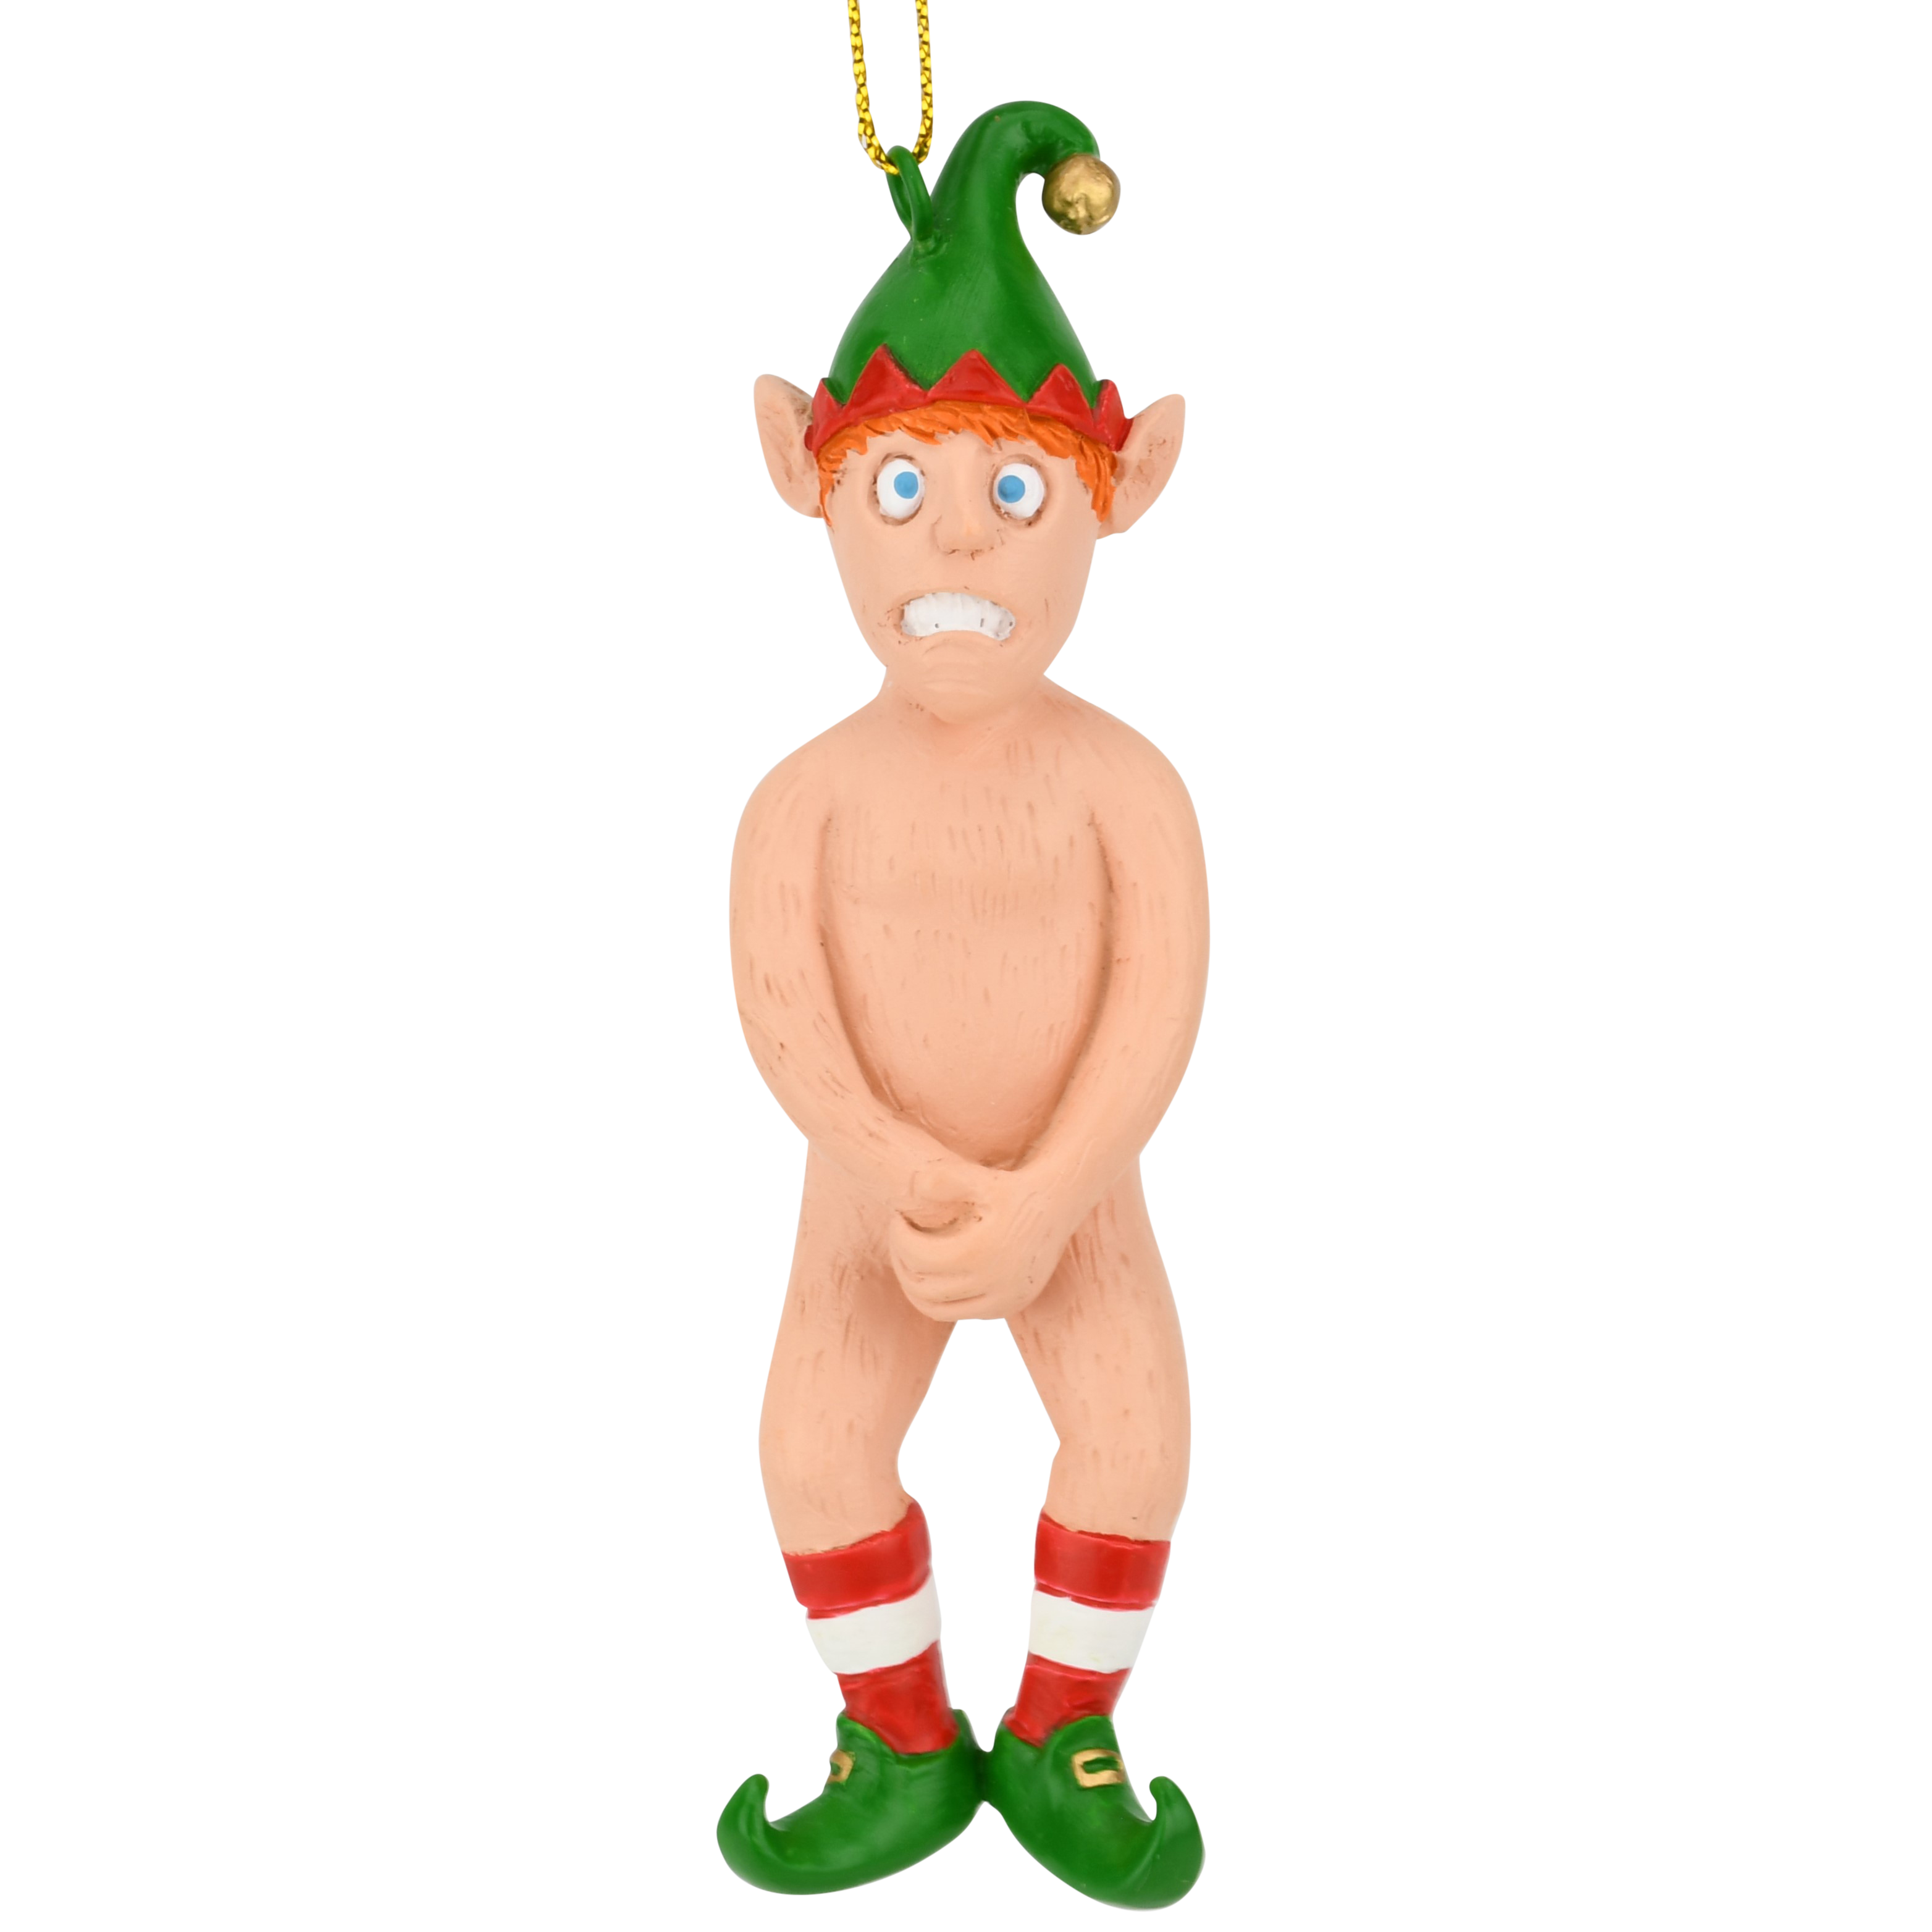 Funny Naked Elf Inappropriate Christmas Ornaments